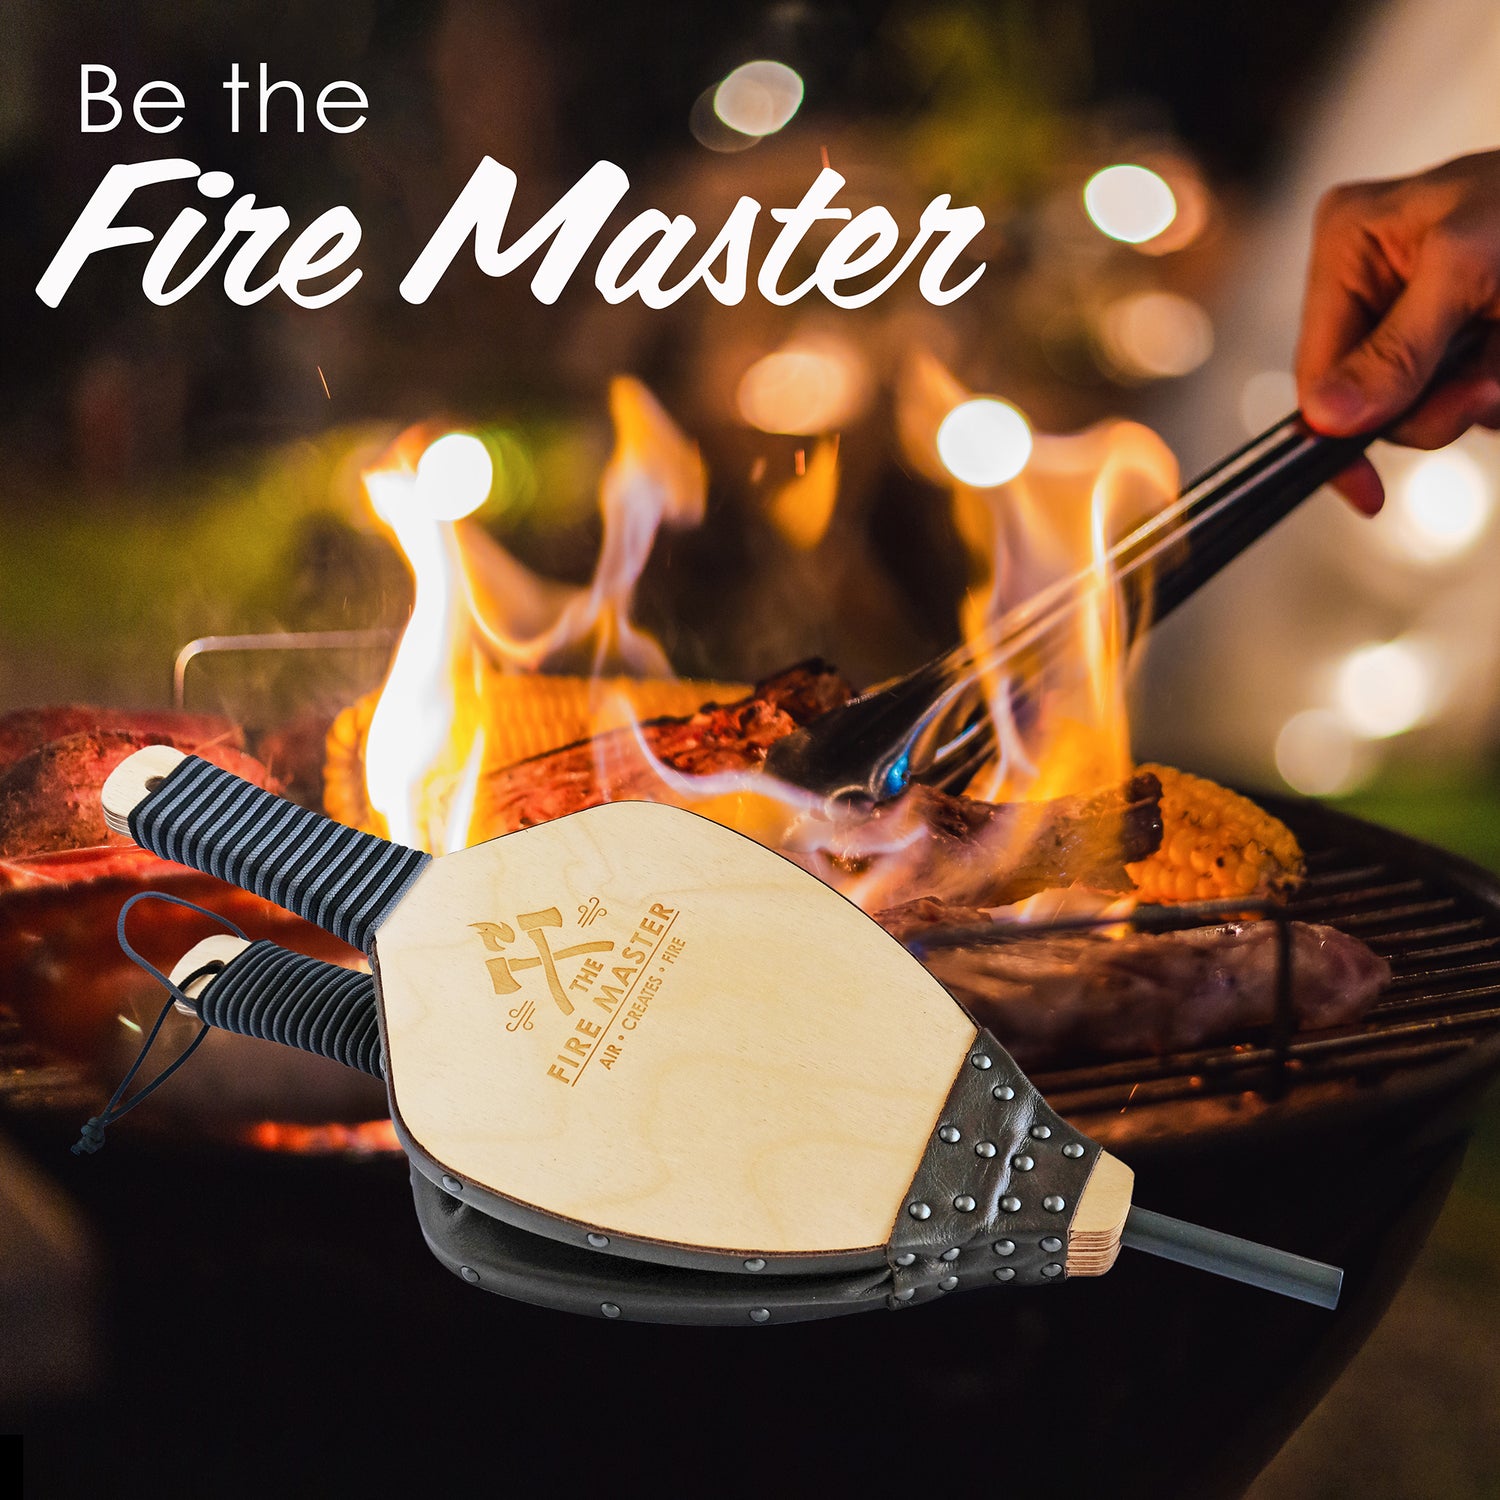 Be the Fire Master